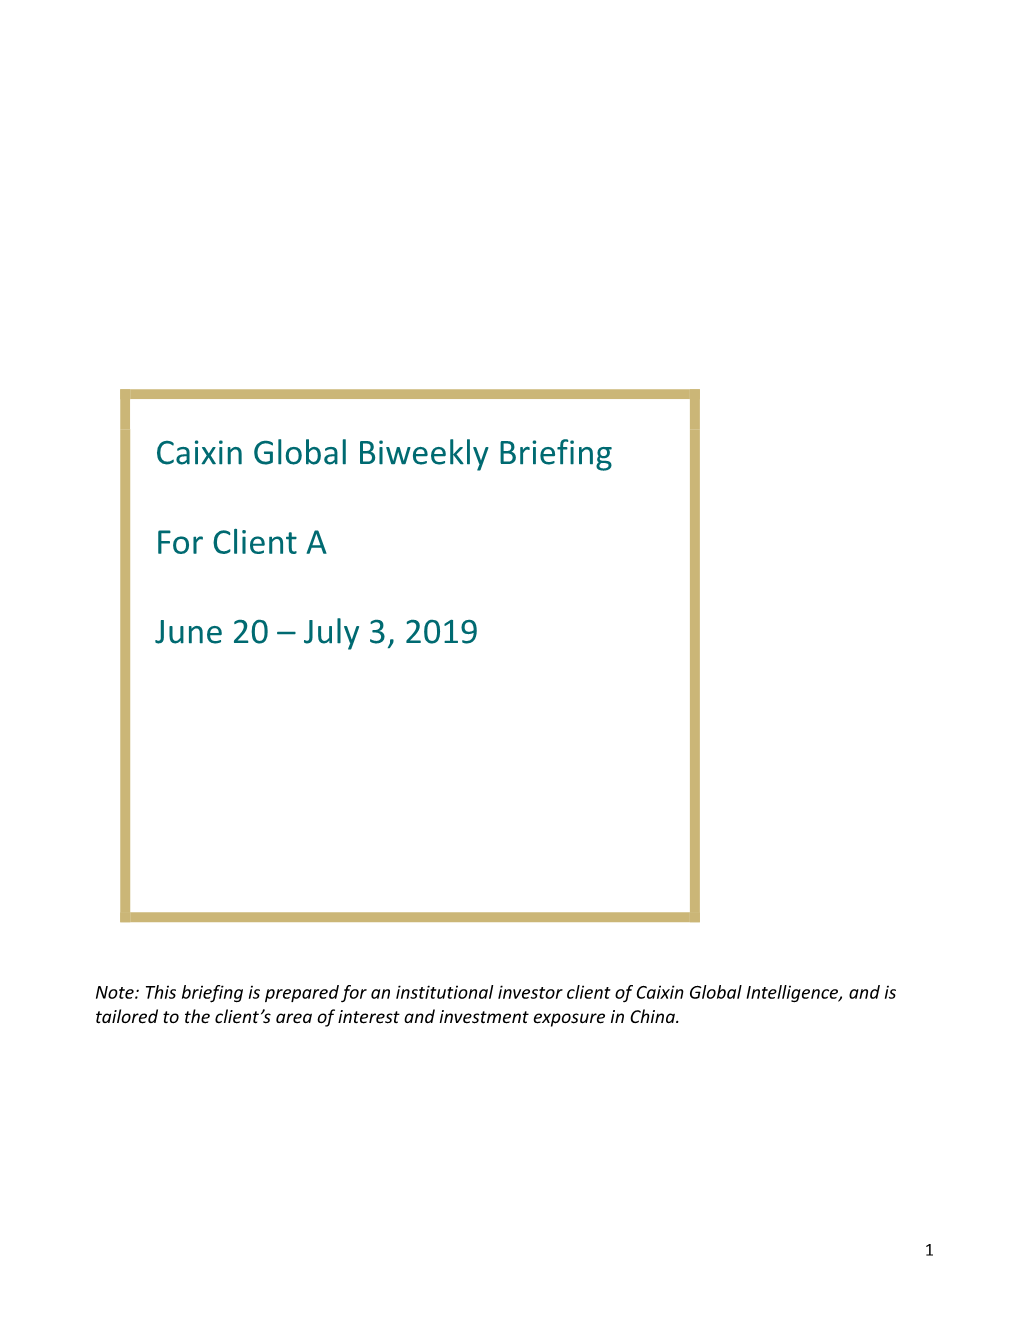 Caixin Global Biweekly Briefing for Client a June 20 – July 3, 2019